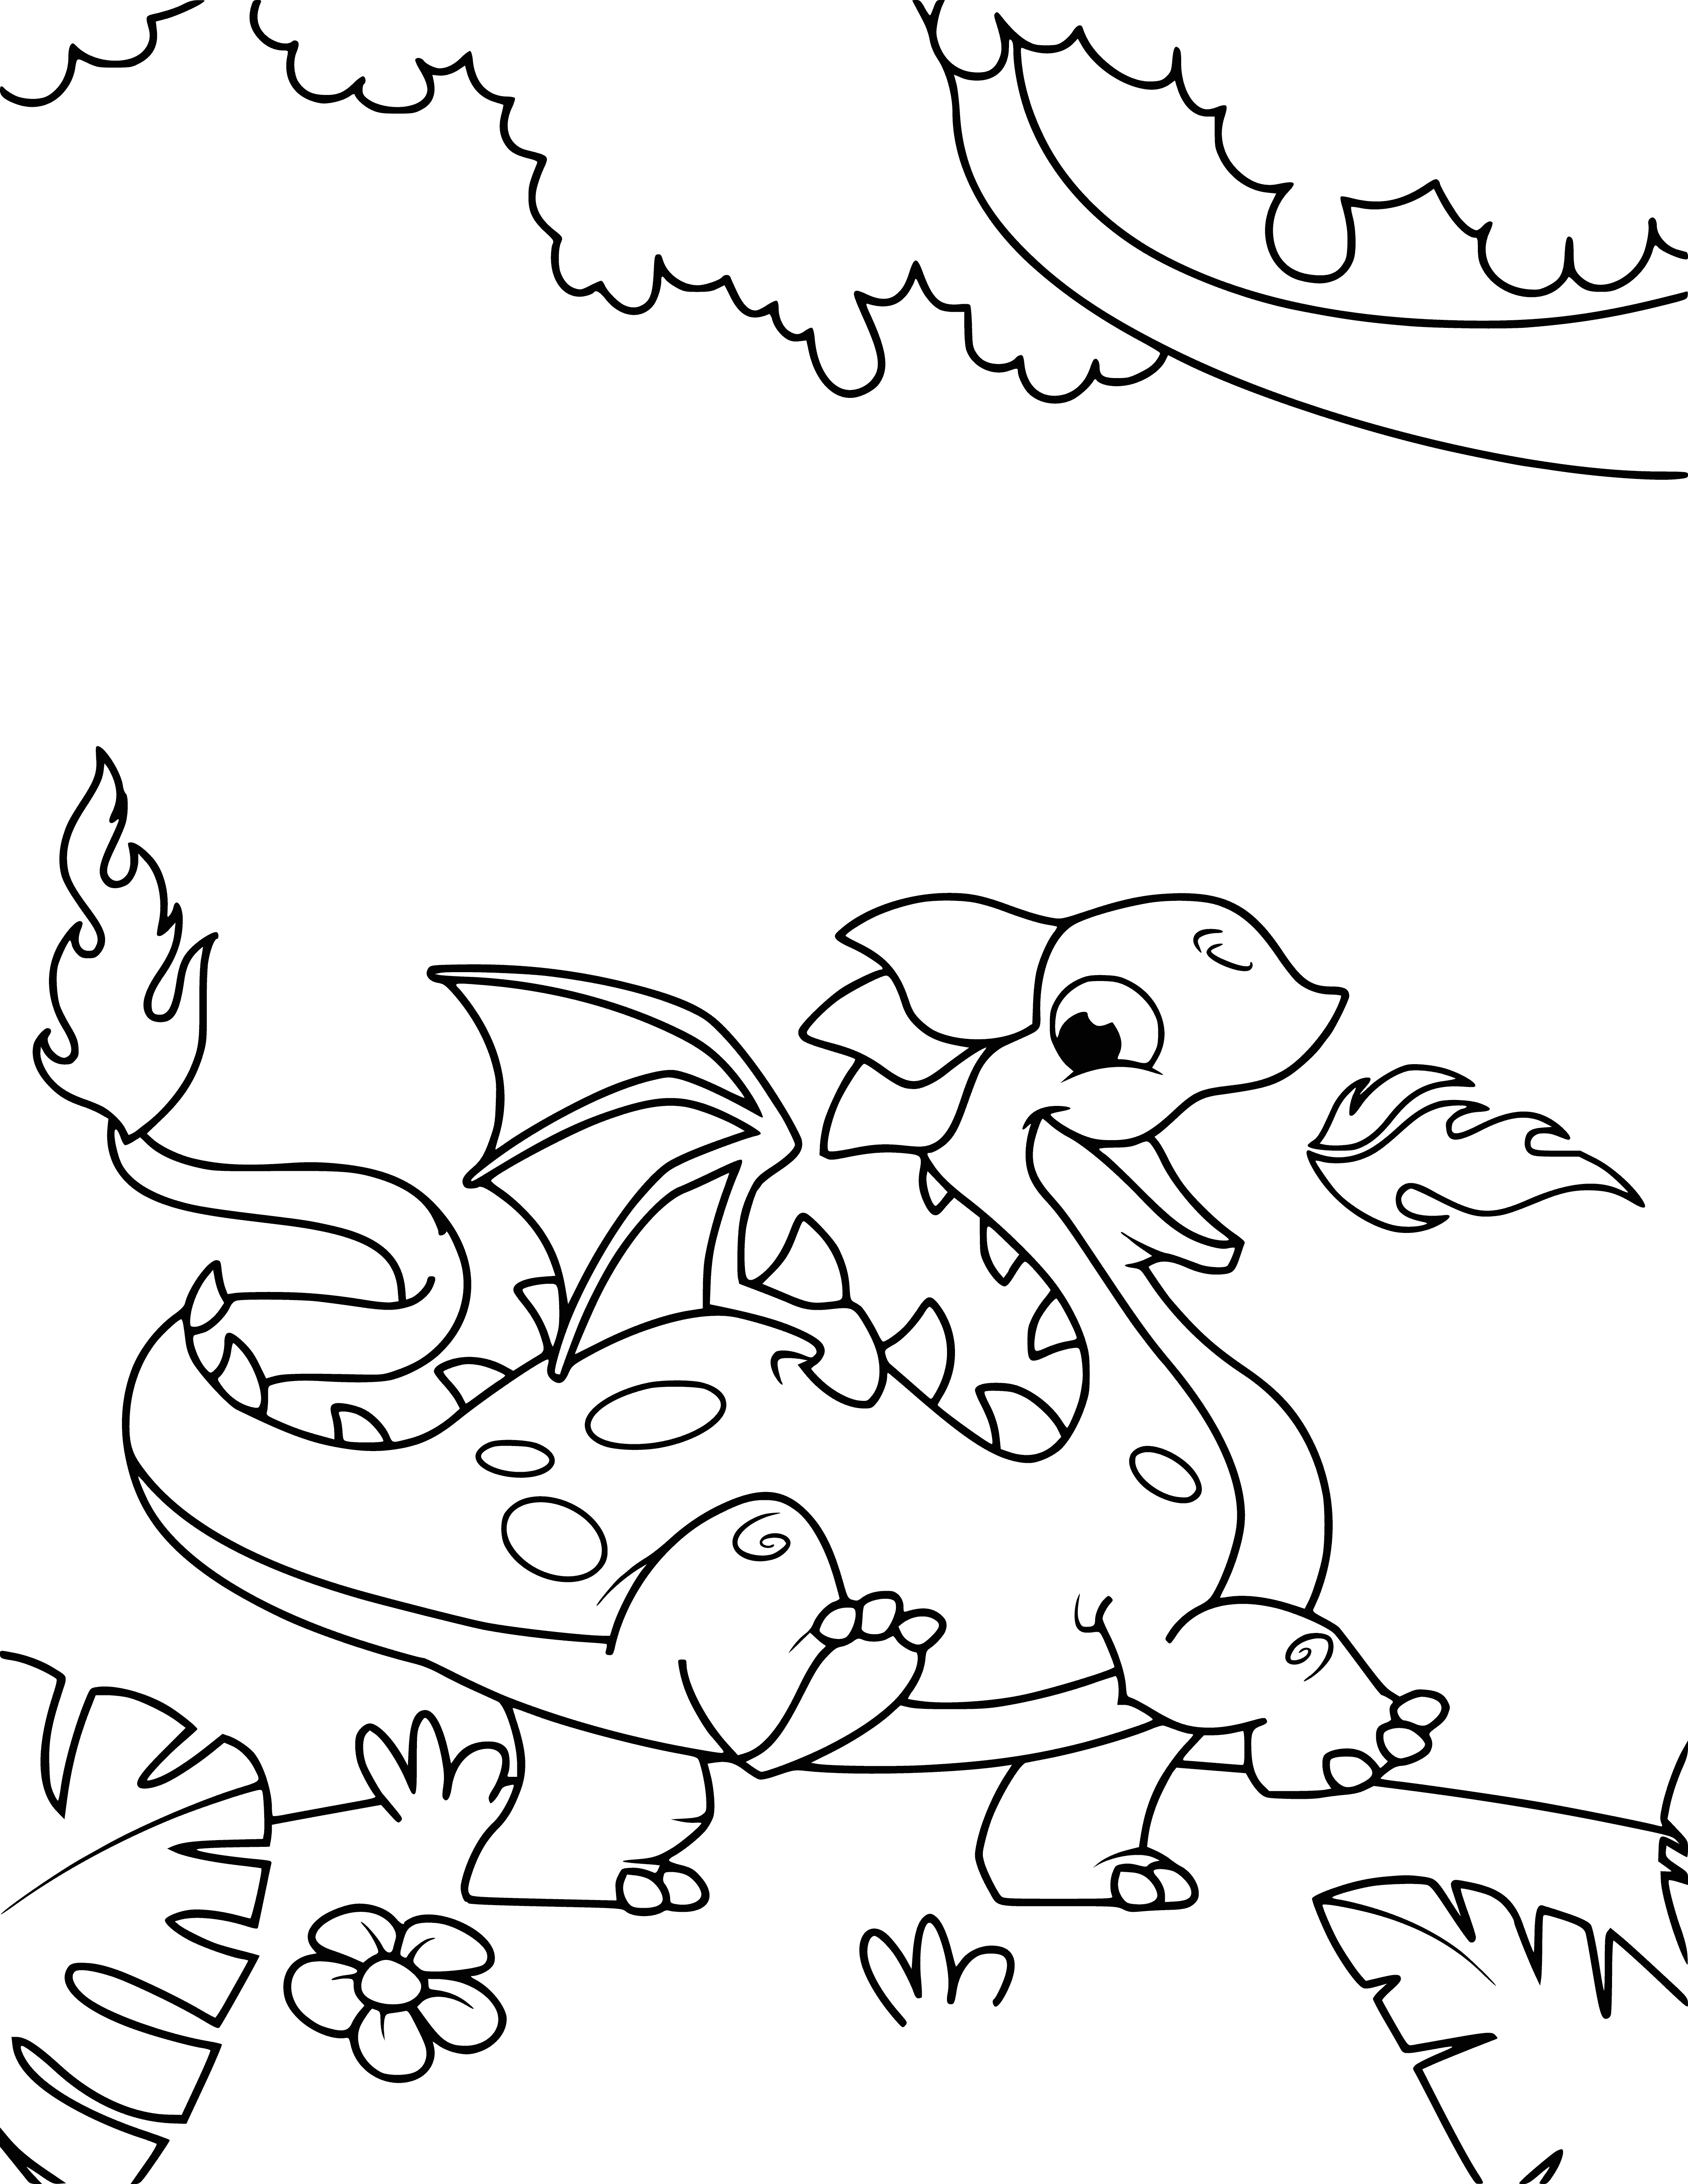 coloring page: Cheerful dragon sits on rock, deep green scales, light yellow belly, long neck curved and head tilted back, wings spread out and long tail wrapped around body.